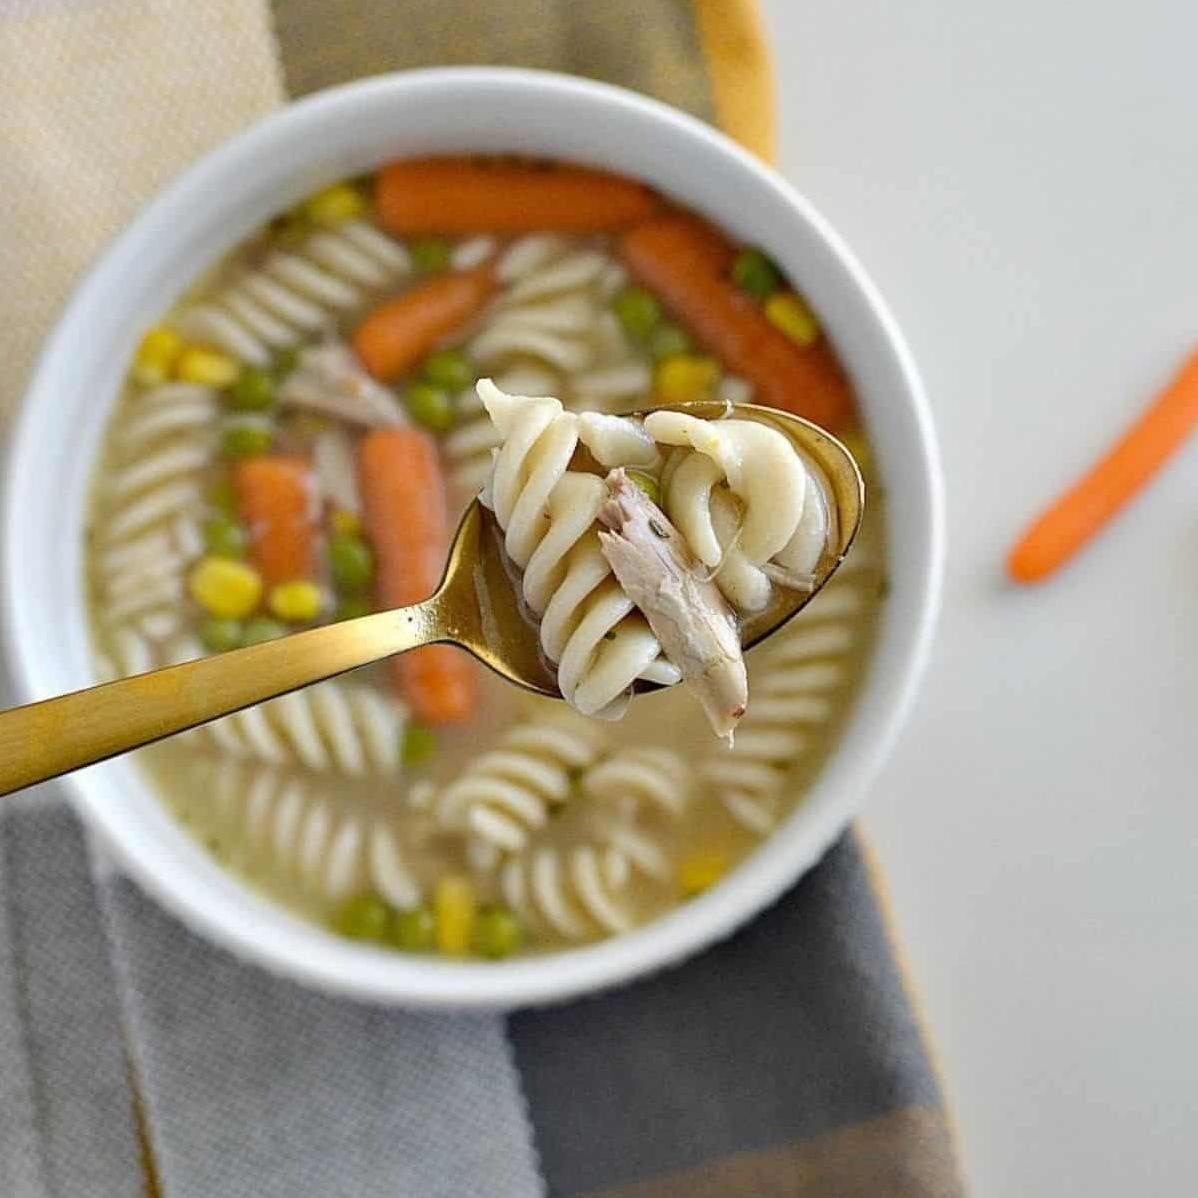  Nothing beats a steaming bowl of gluten-free chicken noodle soup on a rainy day